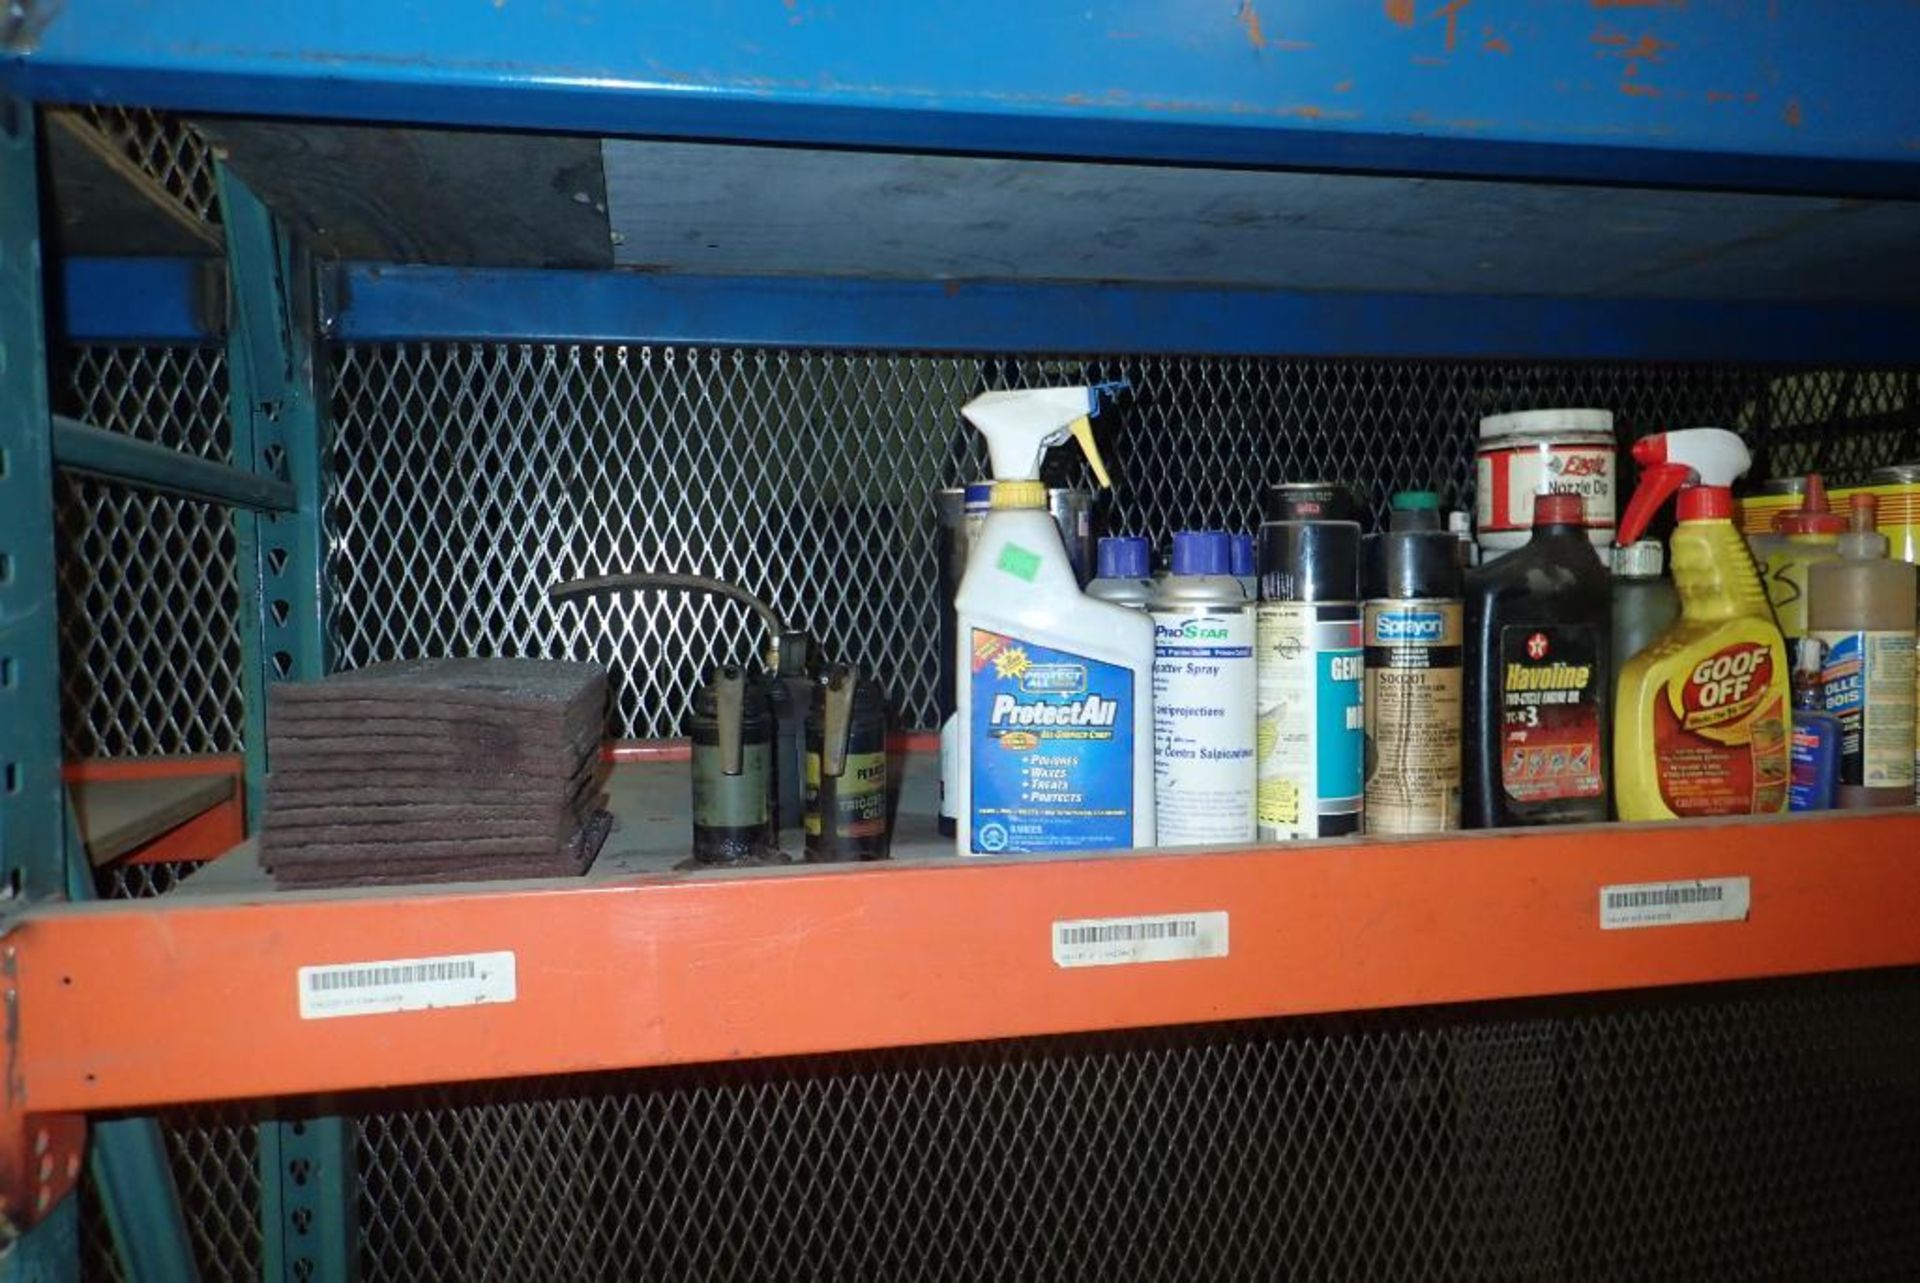 Lot of Asst. Shop Fluid including Oil, Antifreeze, Cutting Oil, Adhesive, etc. - Image 2 of 6